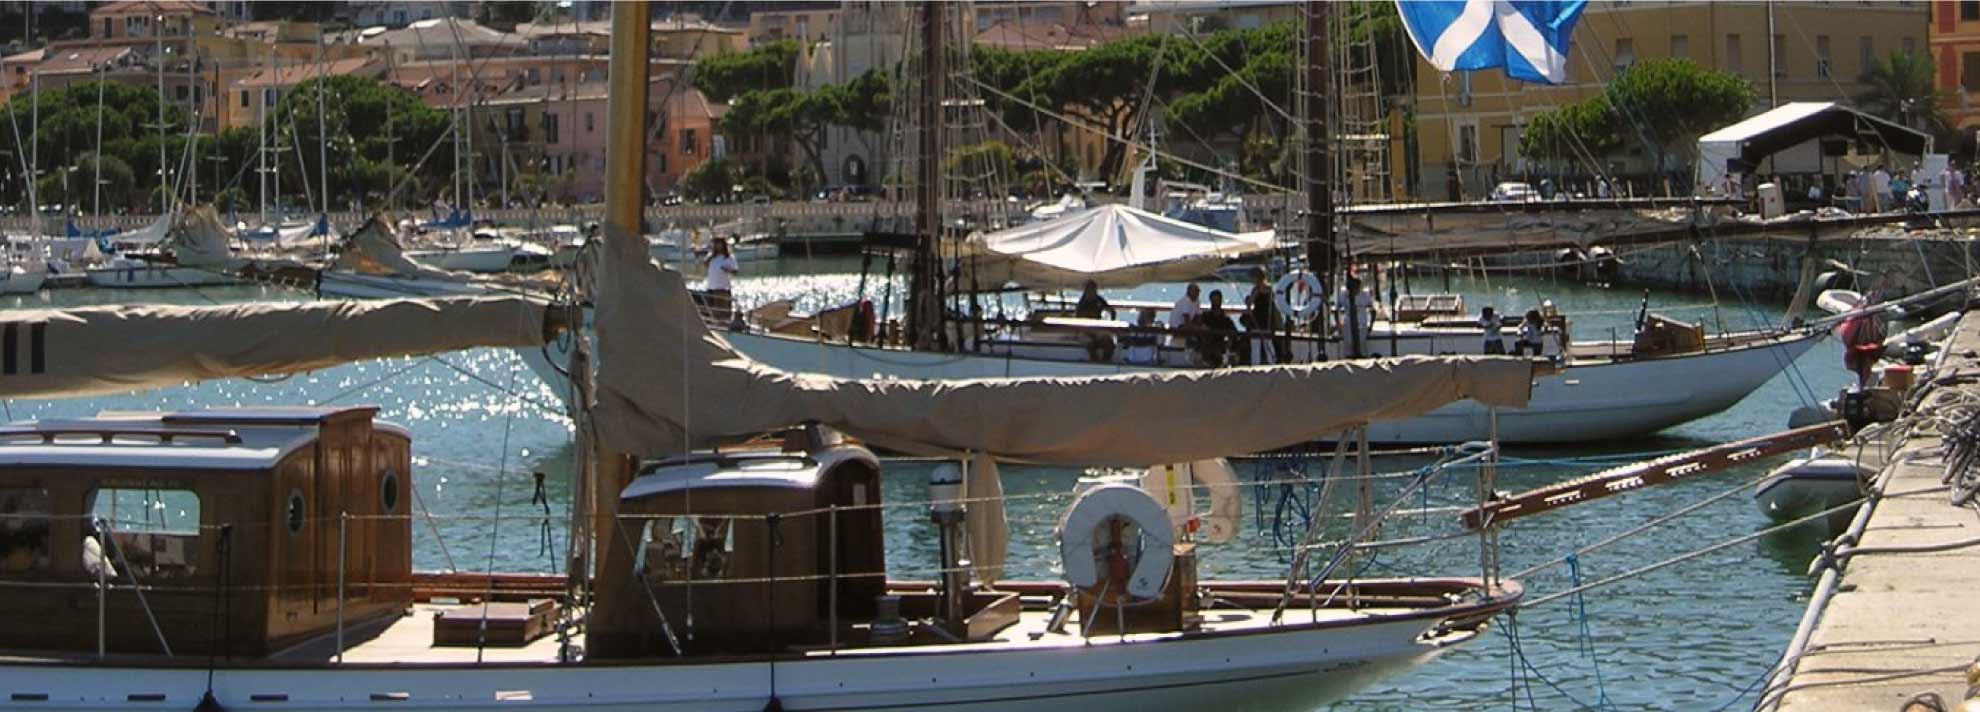 Vintage Sails of Imperia town